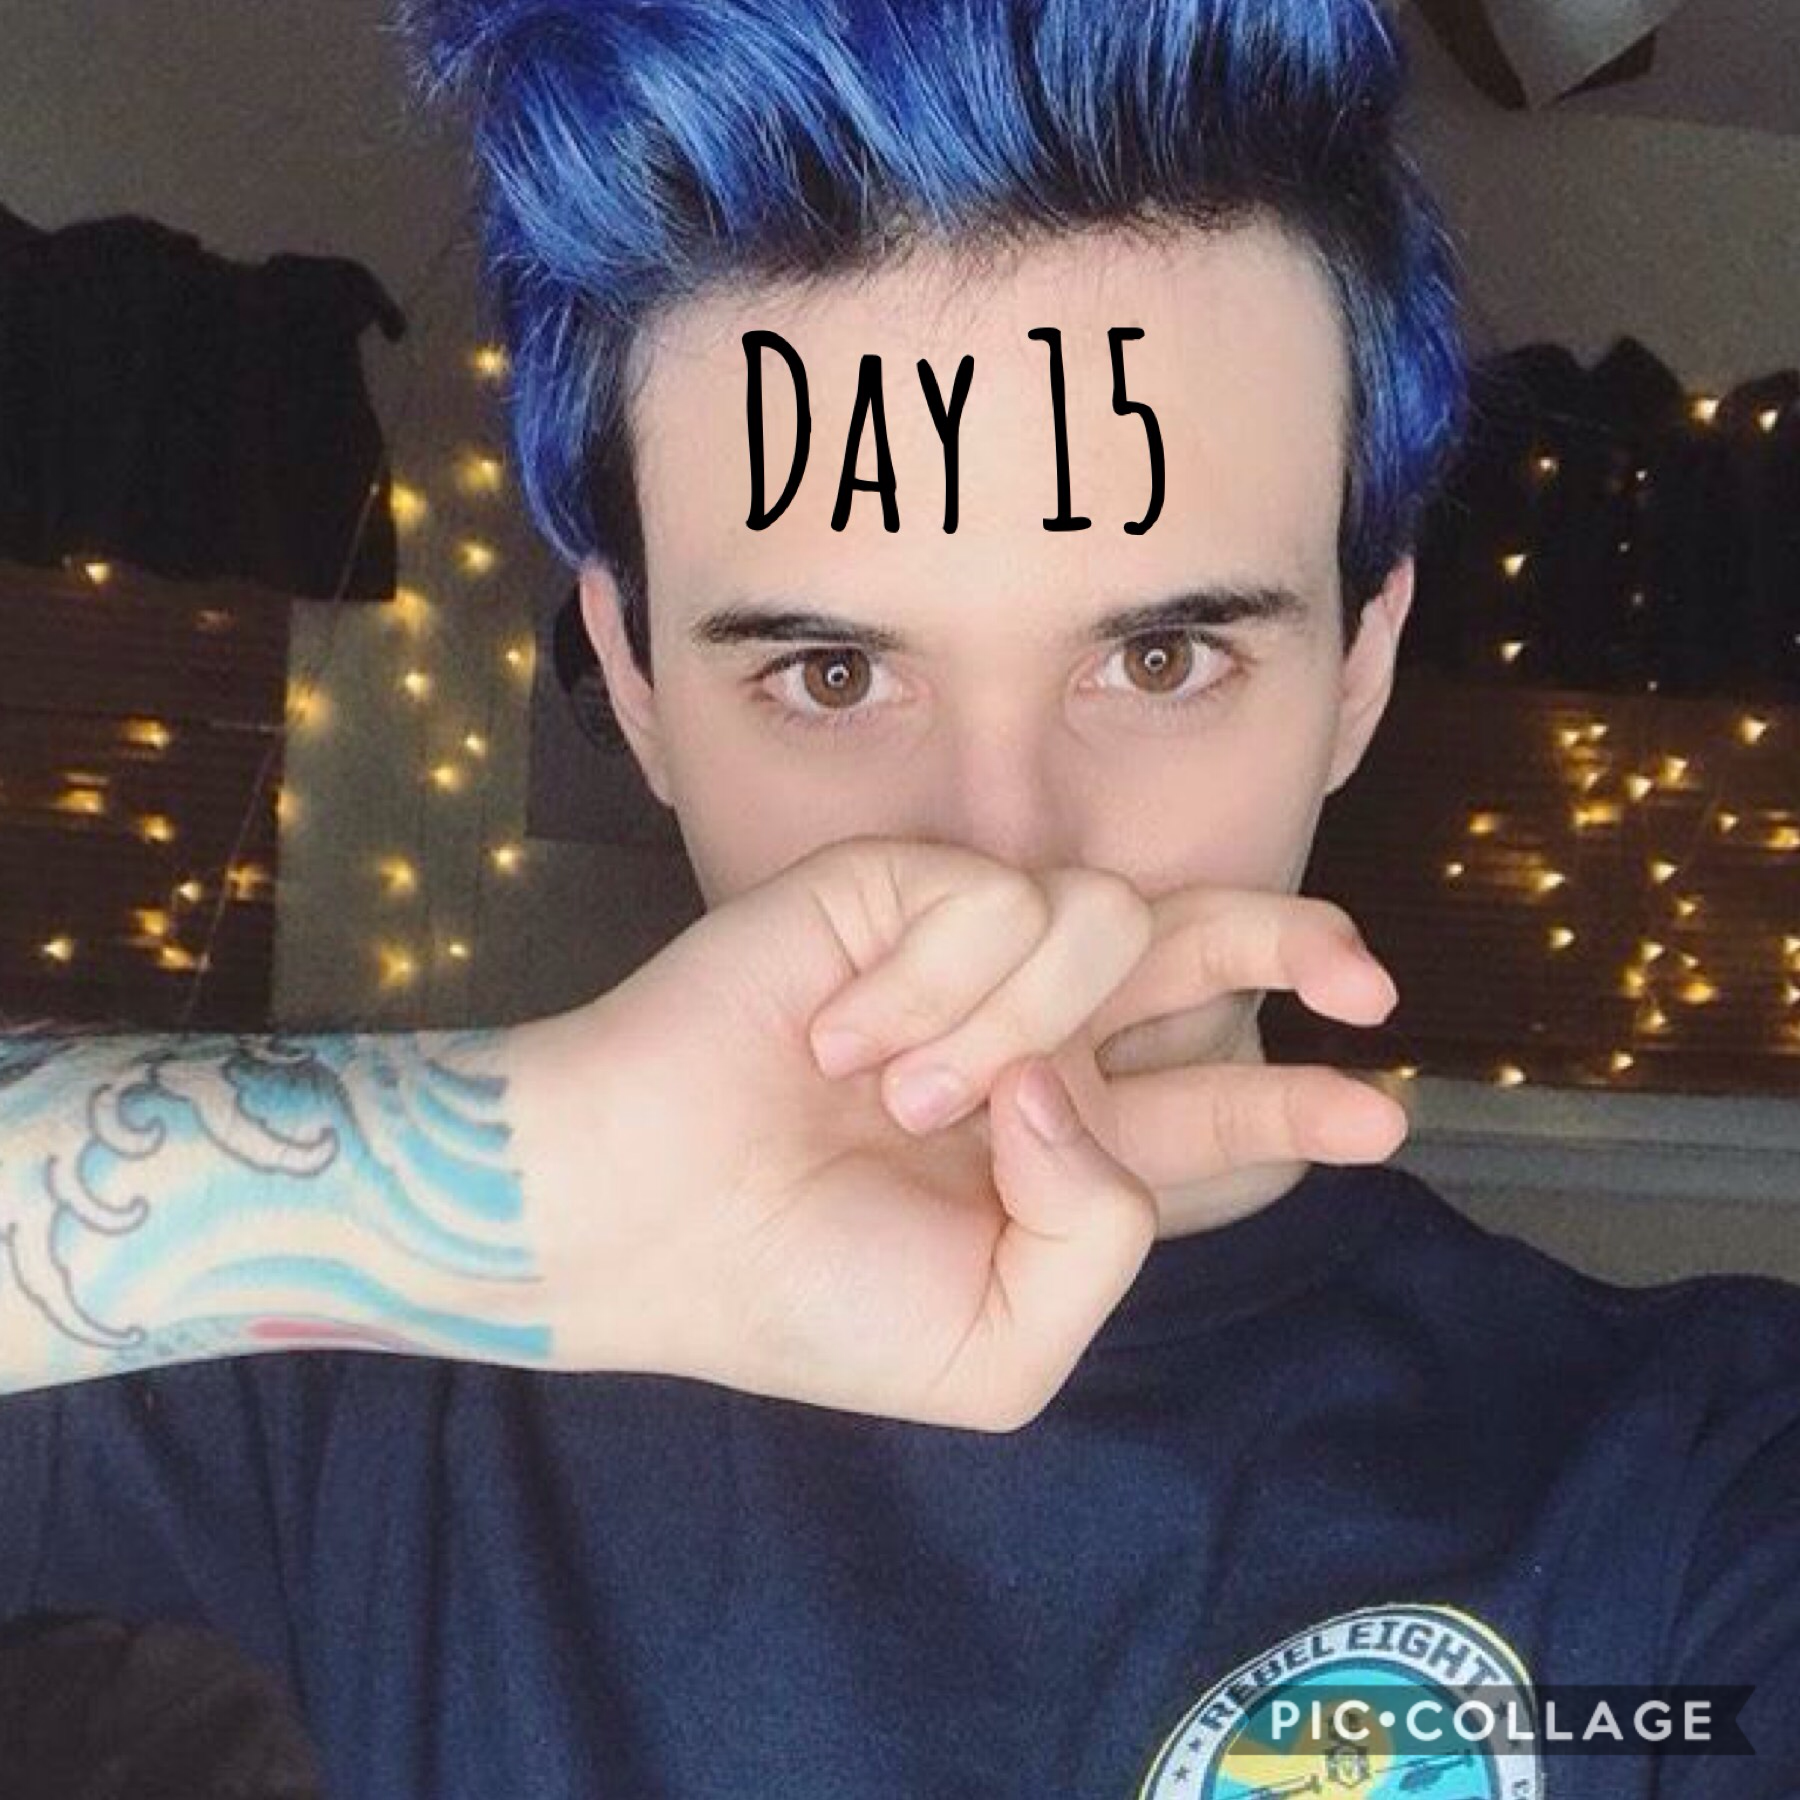 Day 15 

5/18/19